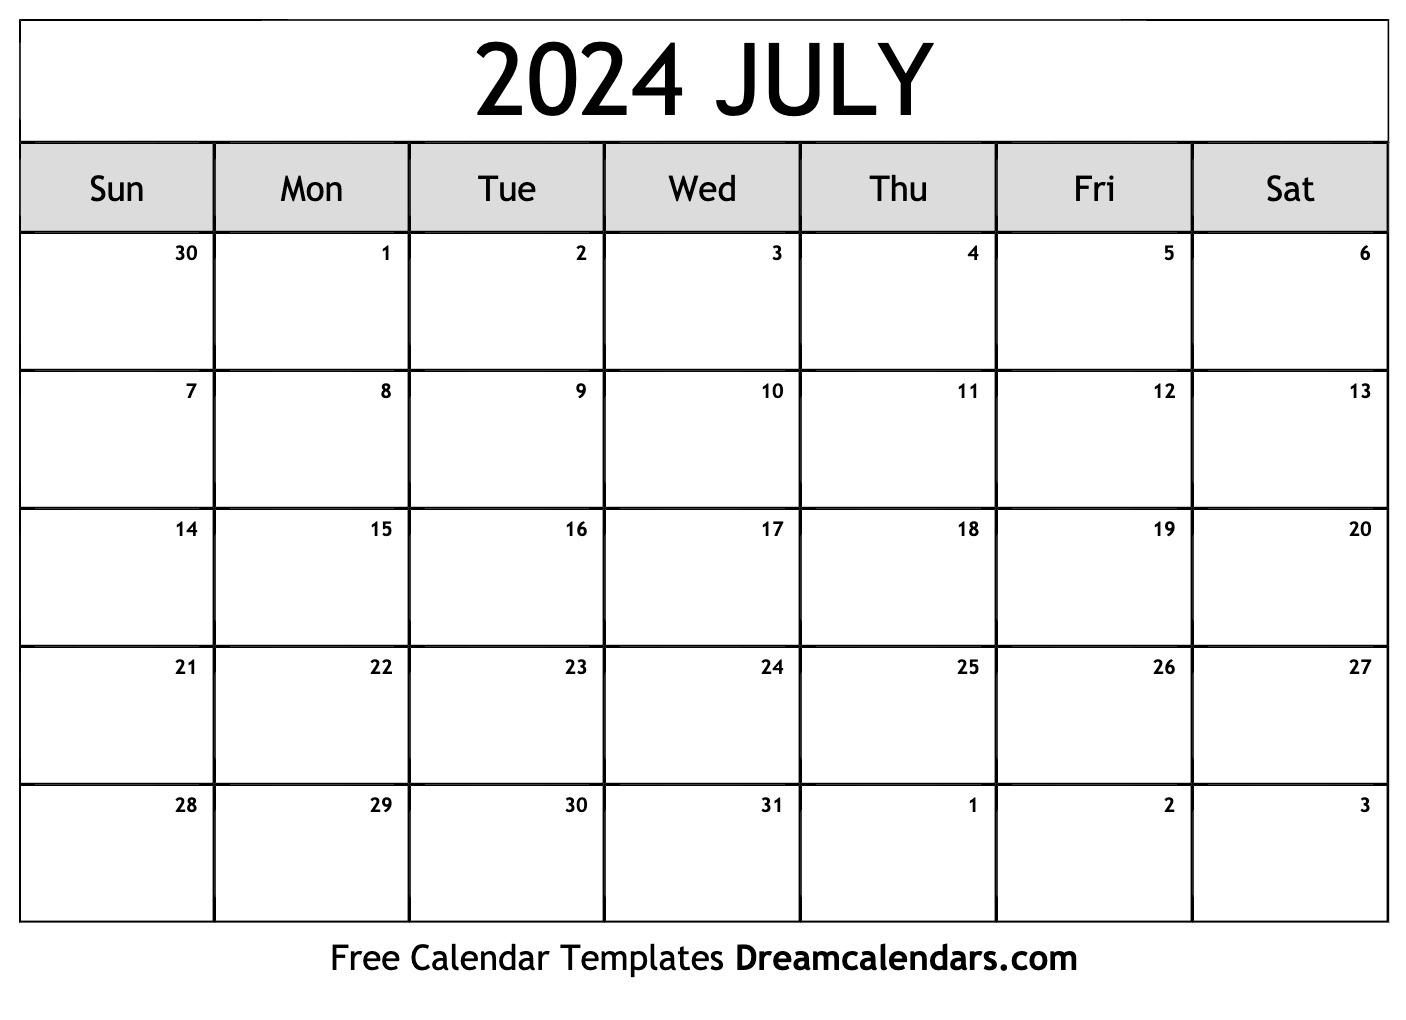 July 2024 Calendar - Free Printable With Holidays And Observances | Calendar Pages July 2024